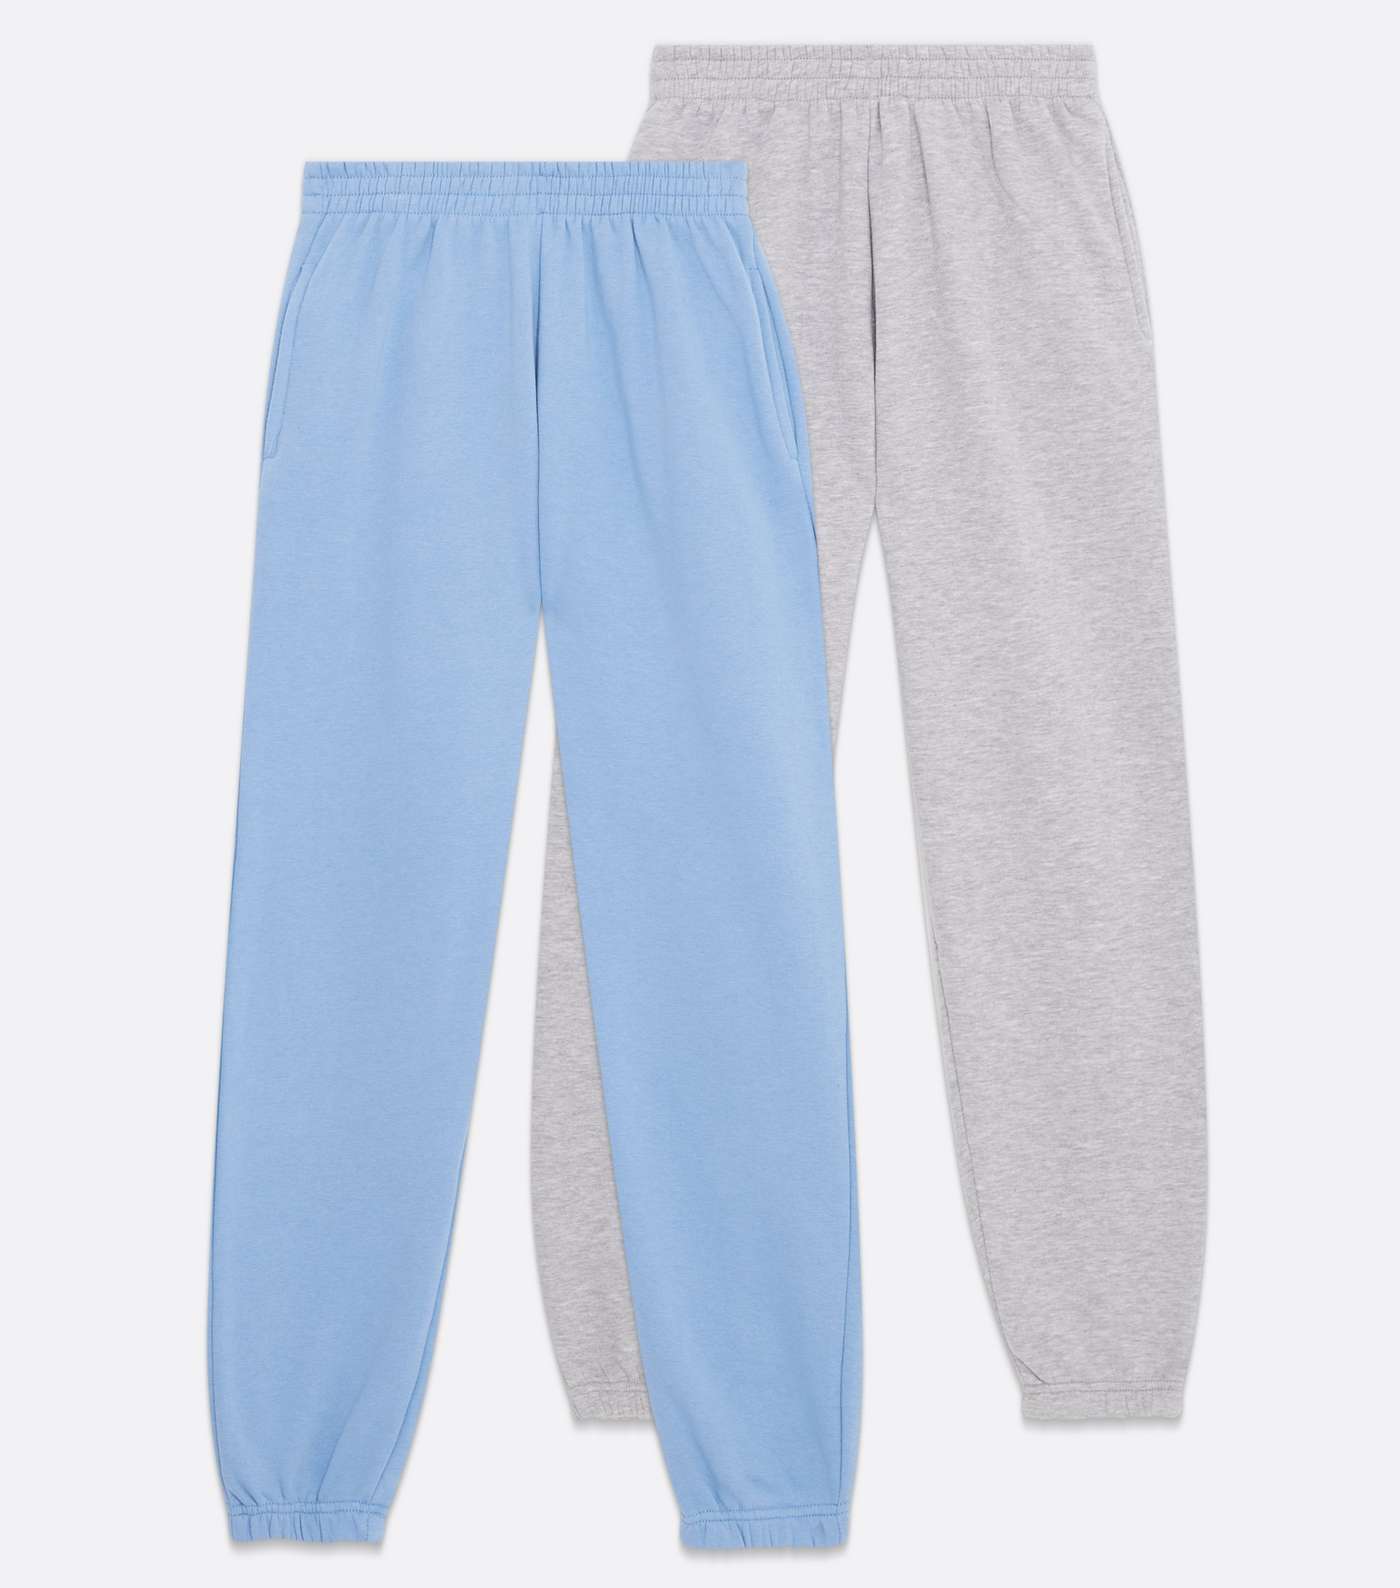 Girls 2 Pack Pale Blue and Grey Cuffed Joggers Image 5